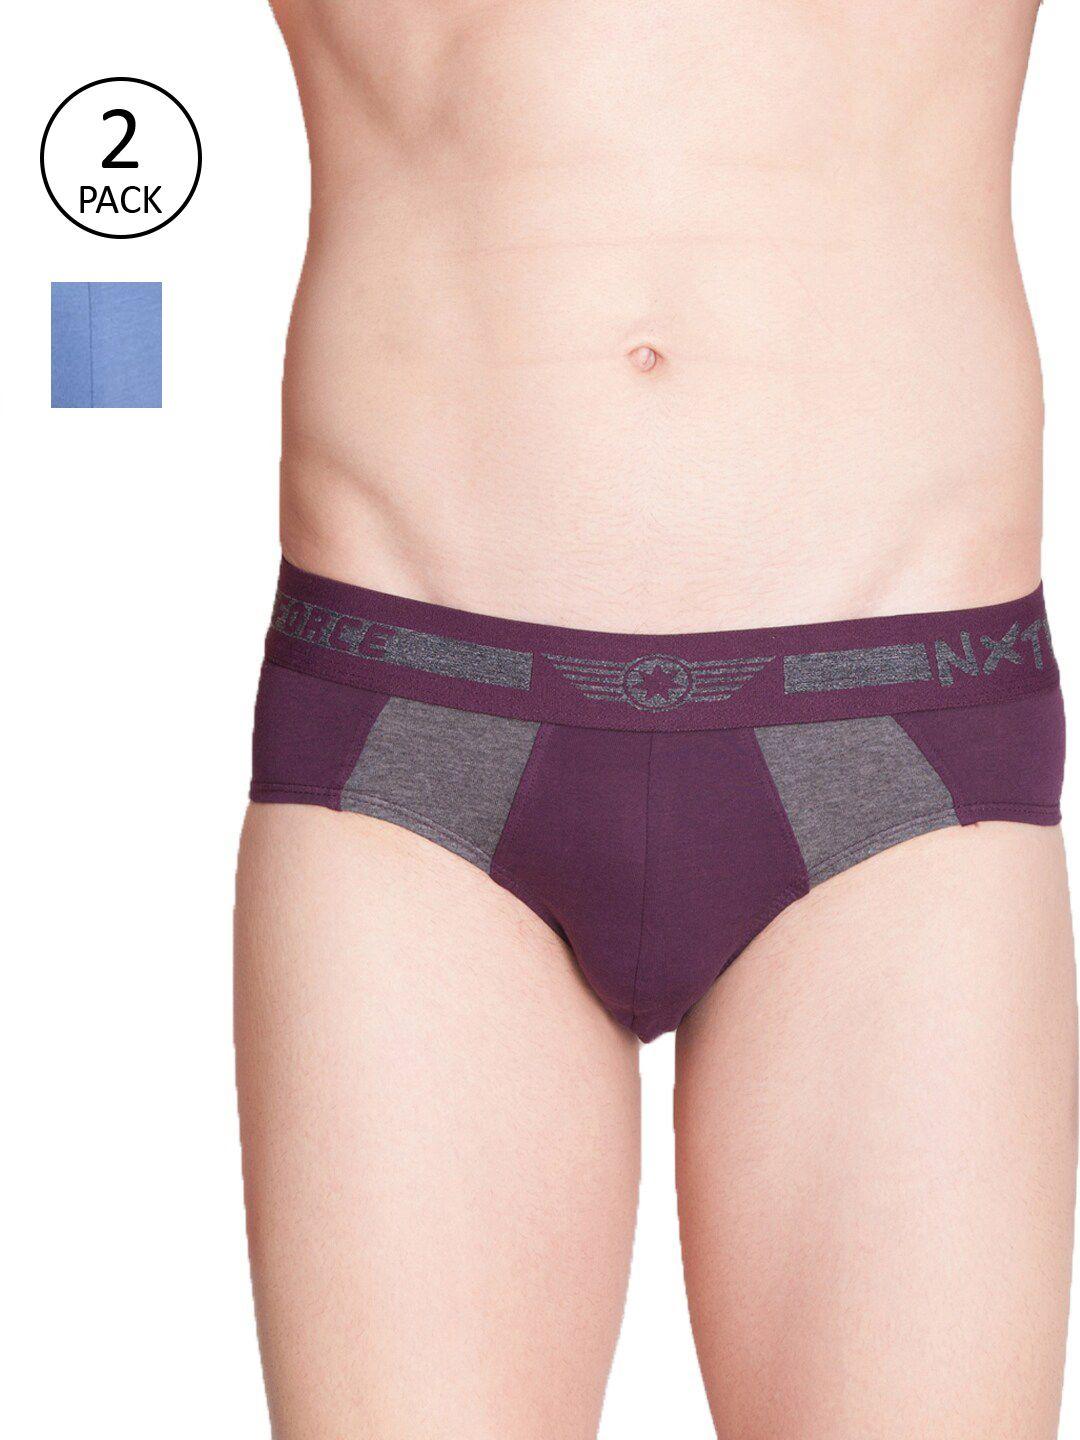 force nxt men pack of 2 assorted basic briefs mnff-112-po2